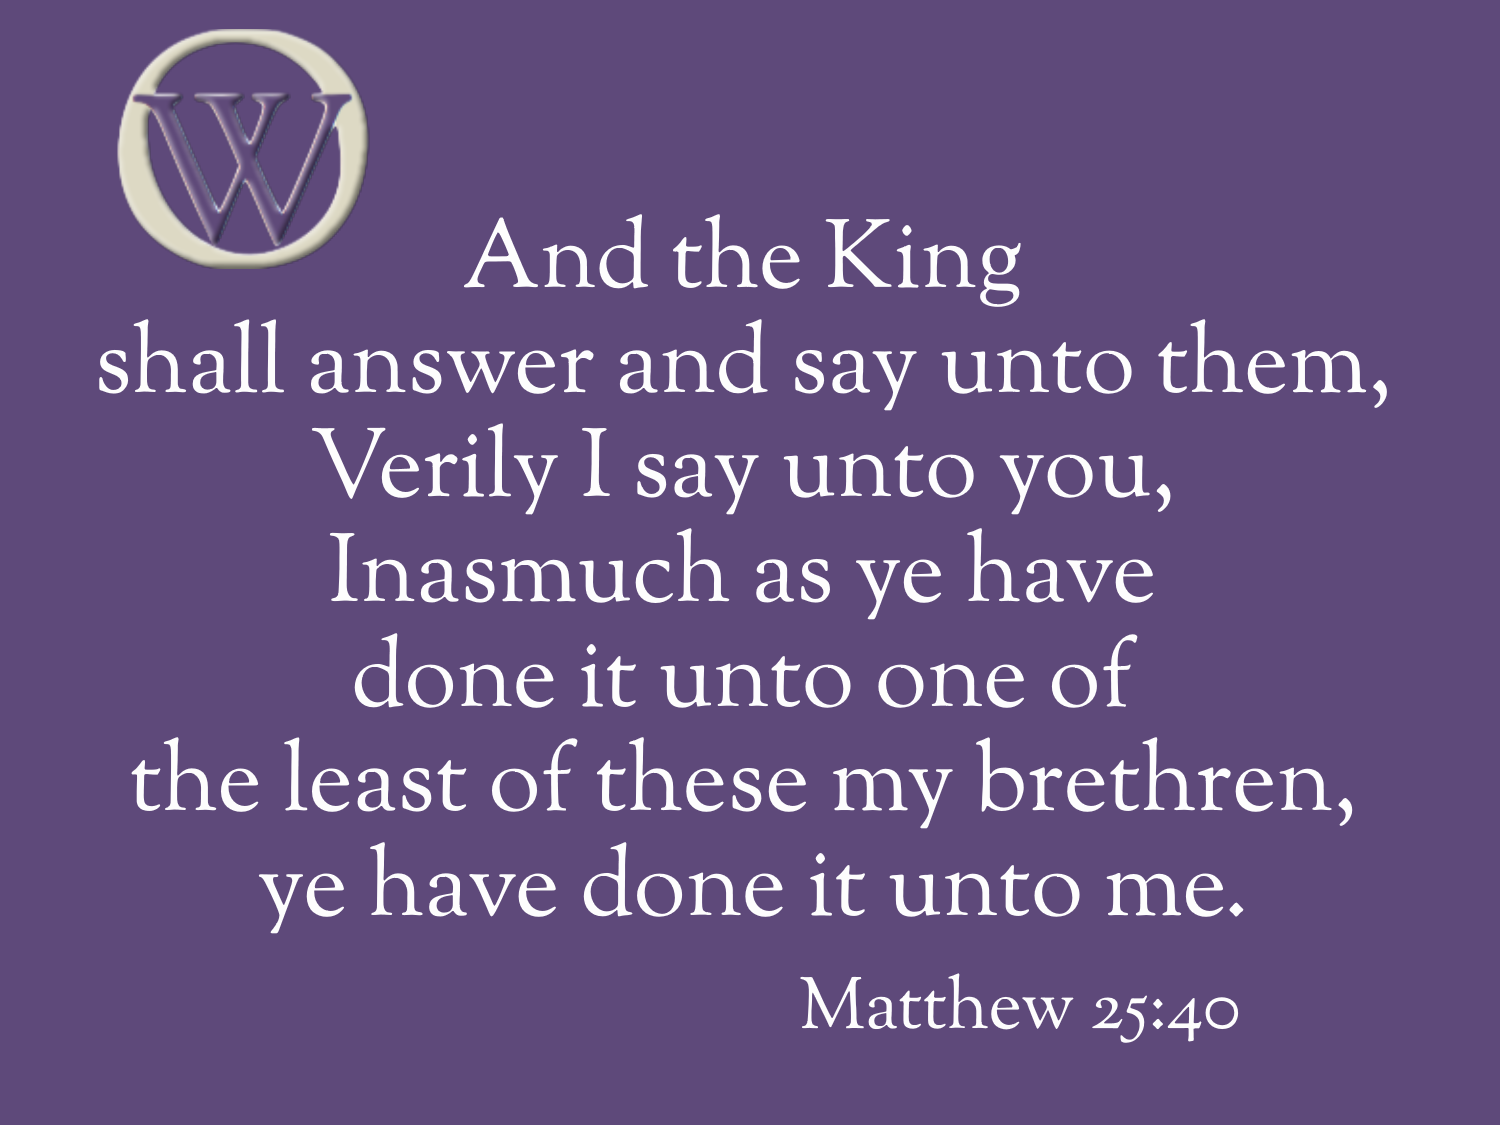 Meme, with the OW logo. Text reads "And the King shall answer and say unto them, Verily I say unto you, Inasmuch as ye have done it unto one of the least of these my brethren, ye have done it unto me." Matthew 25:40 